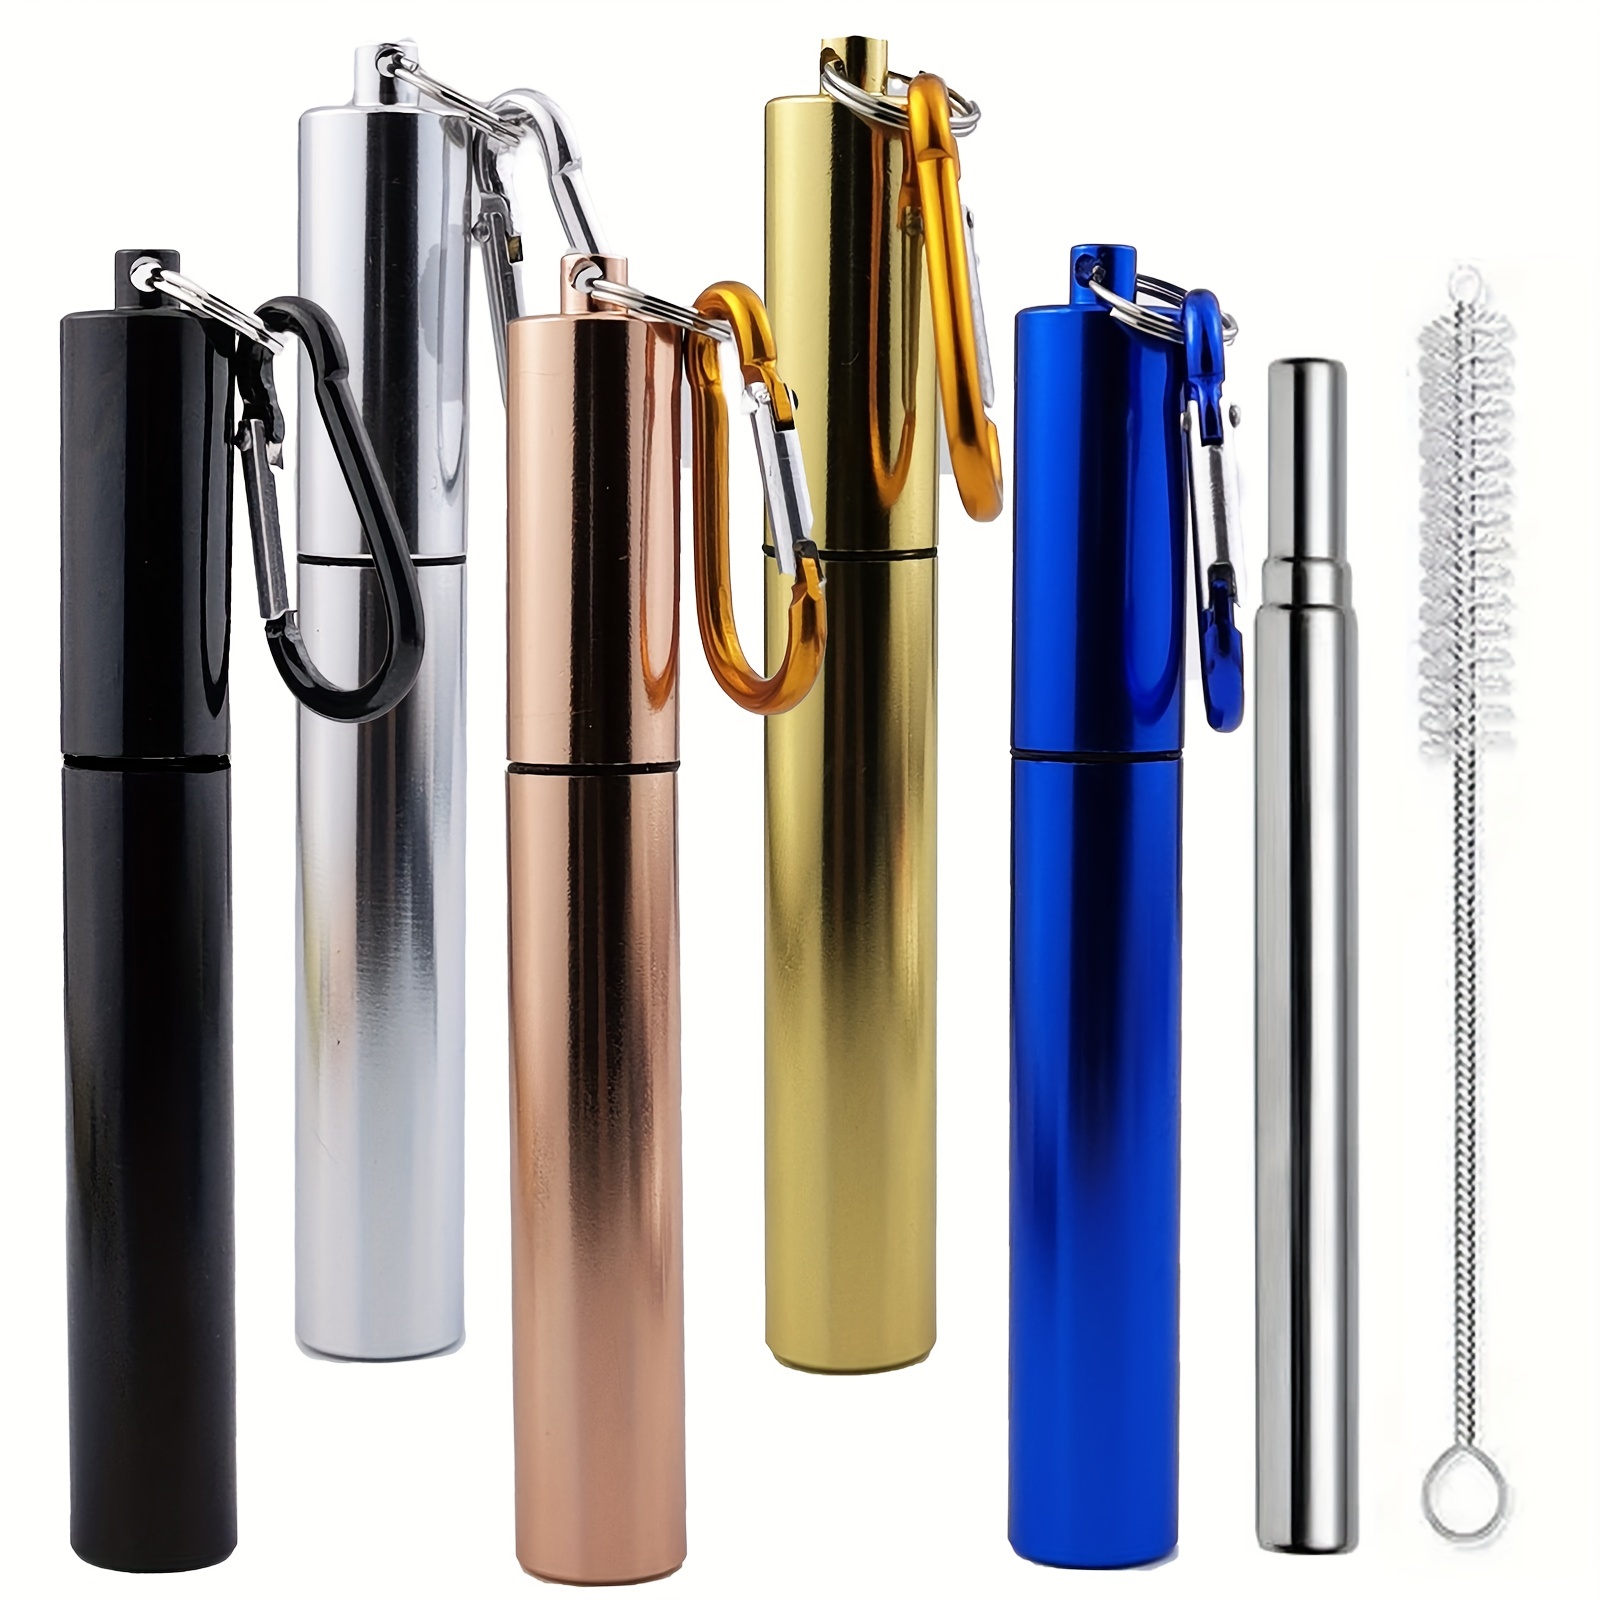 Stainless Steel Foldable Straw